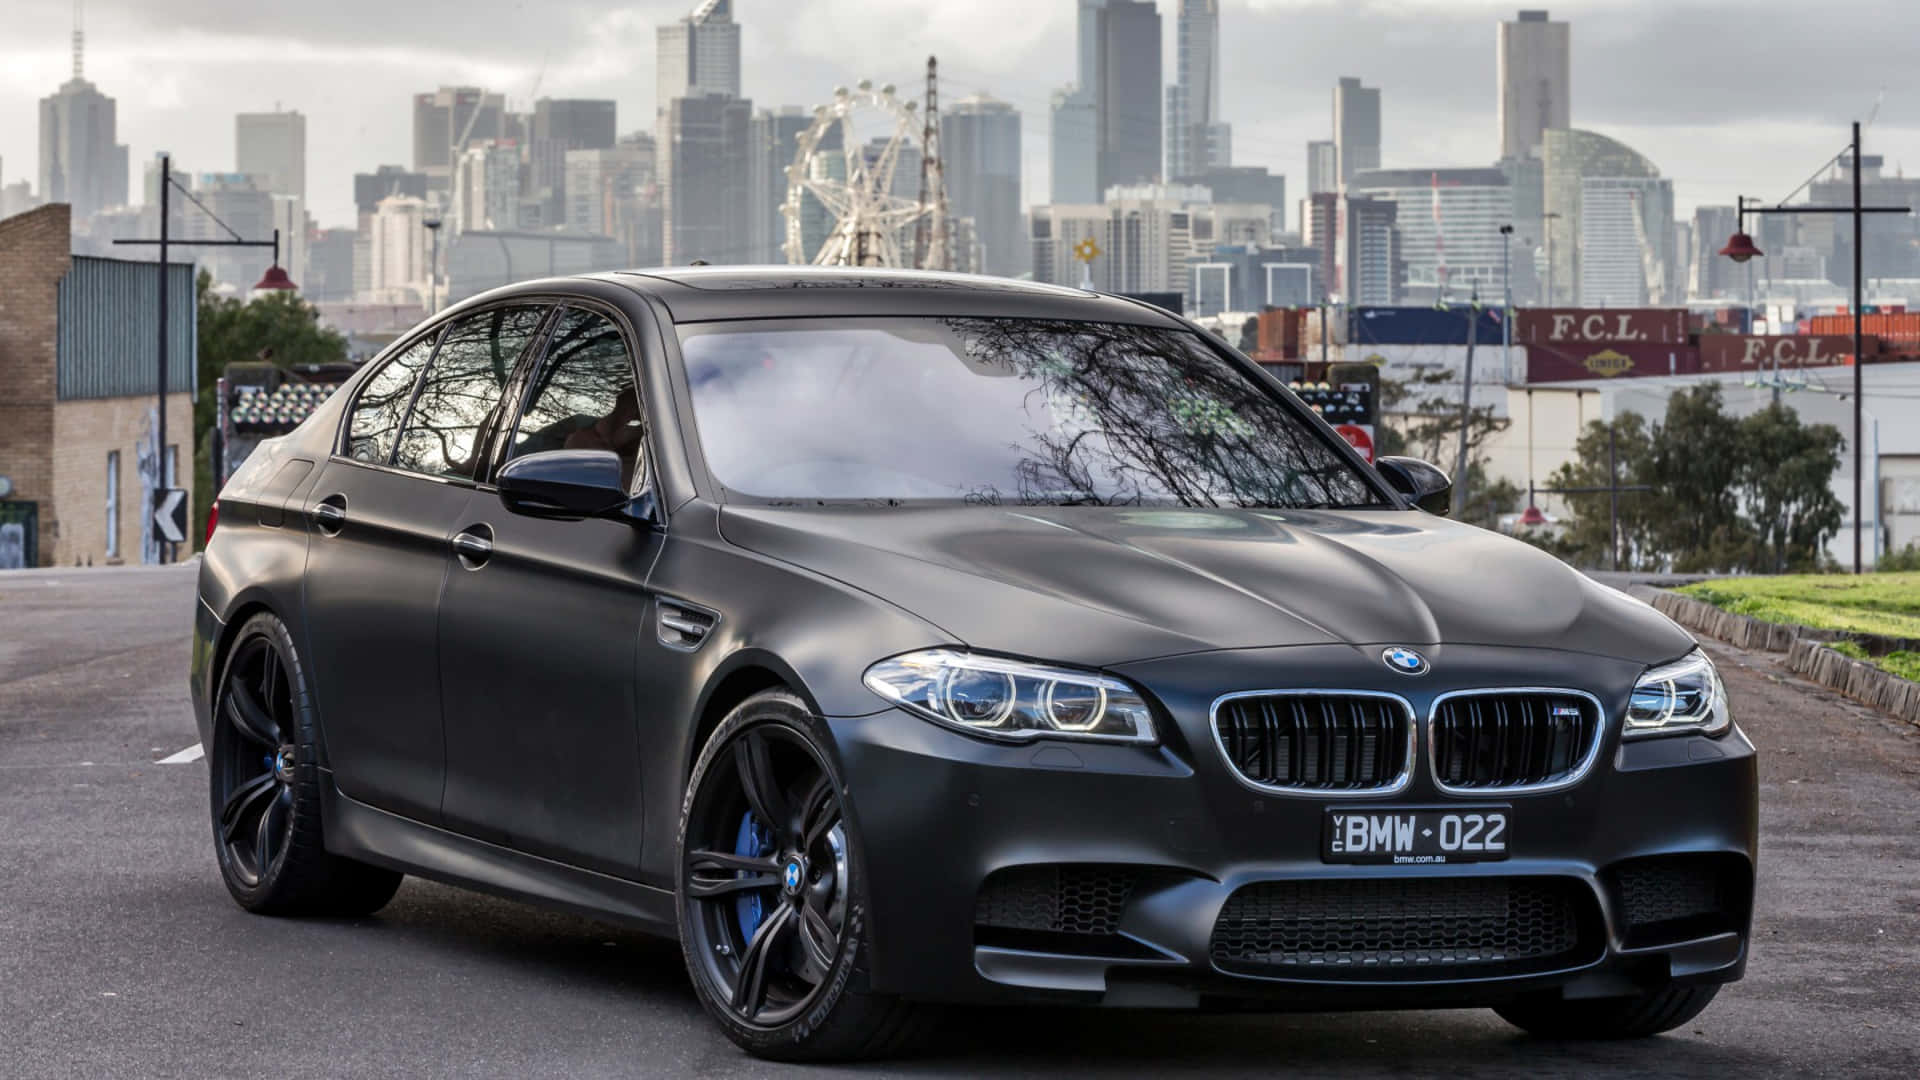 Experience Luxury and Power in the BMW M5 Wallpaper